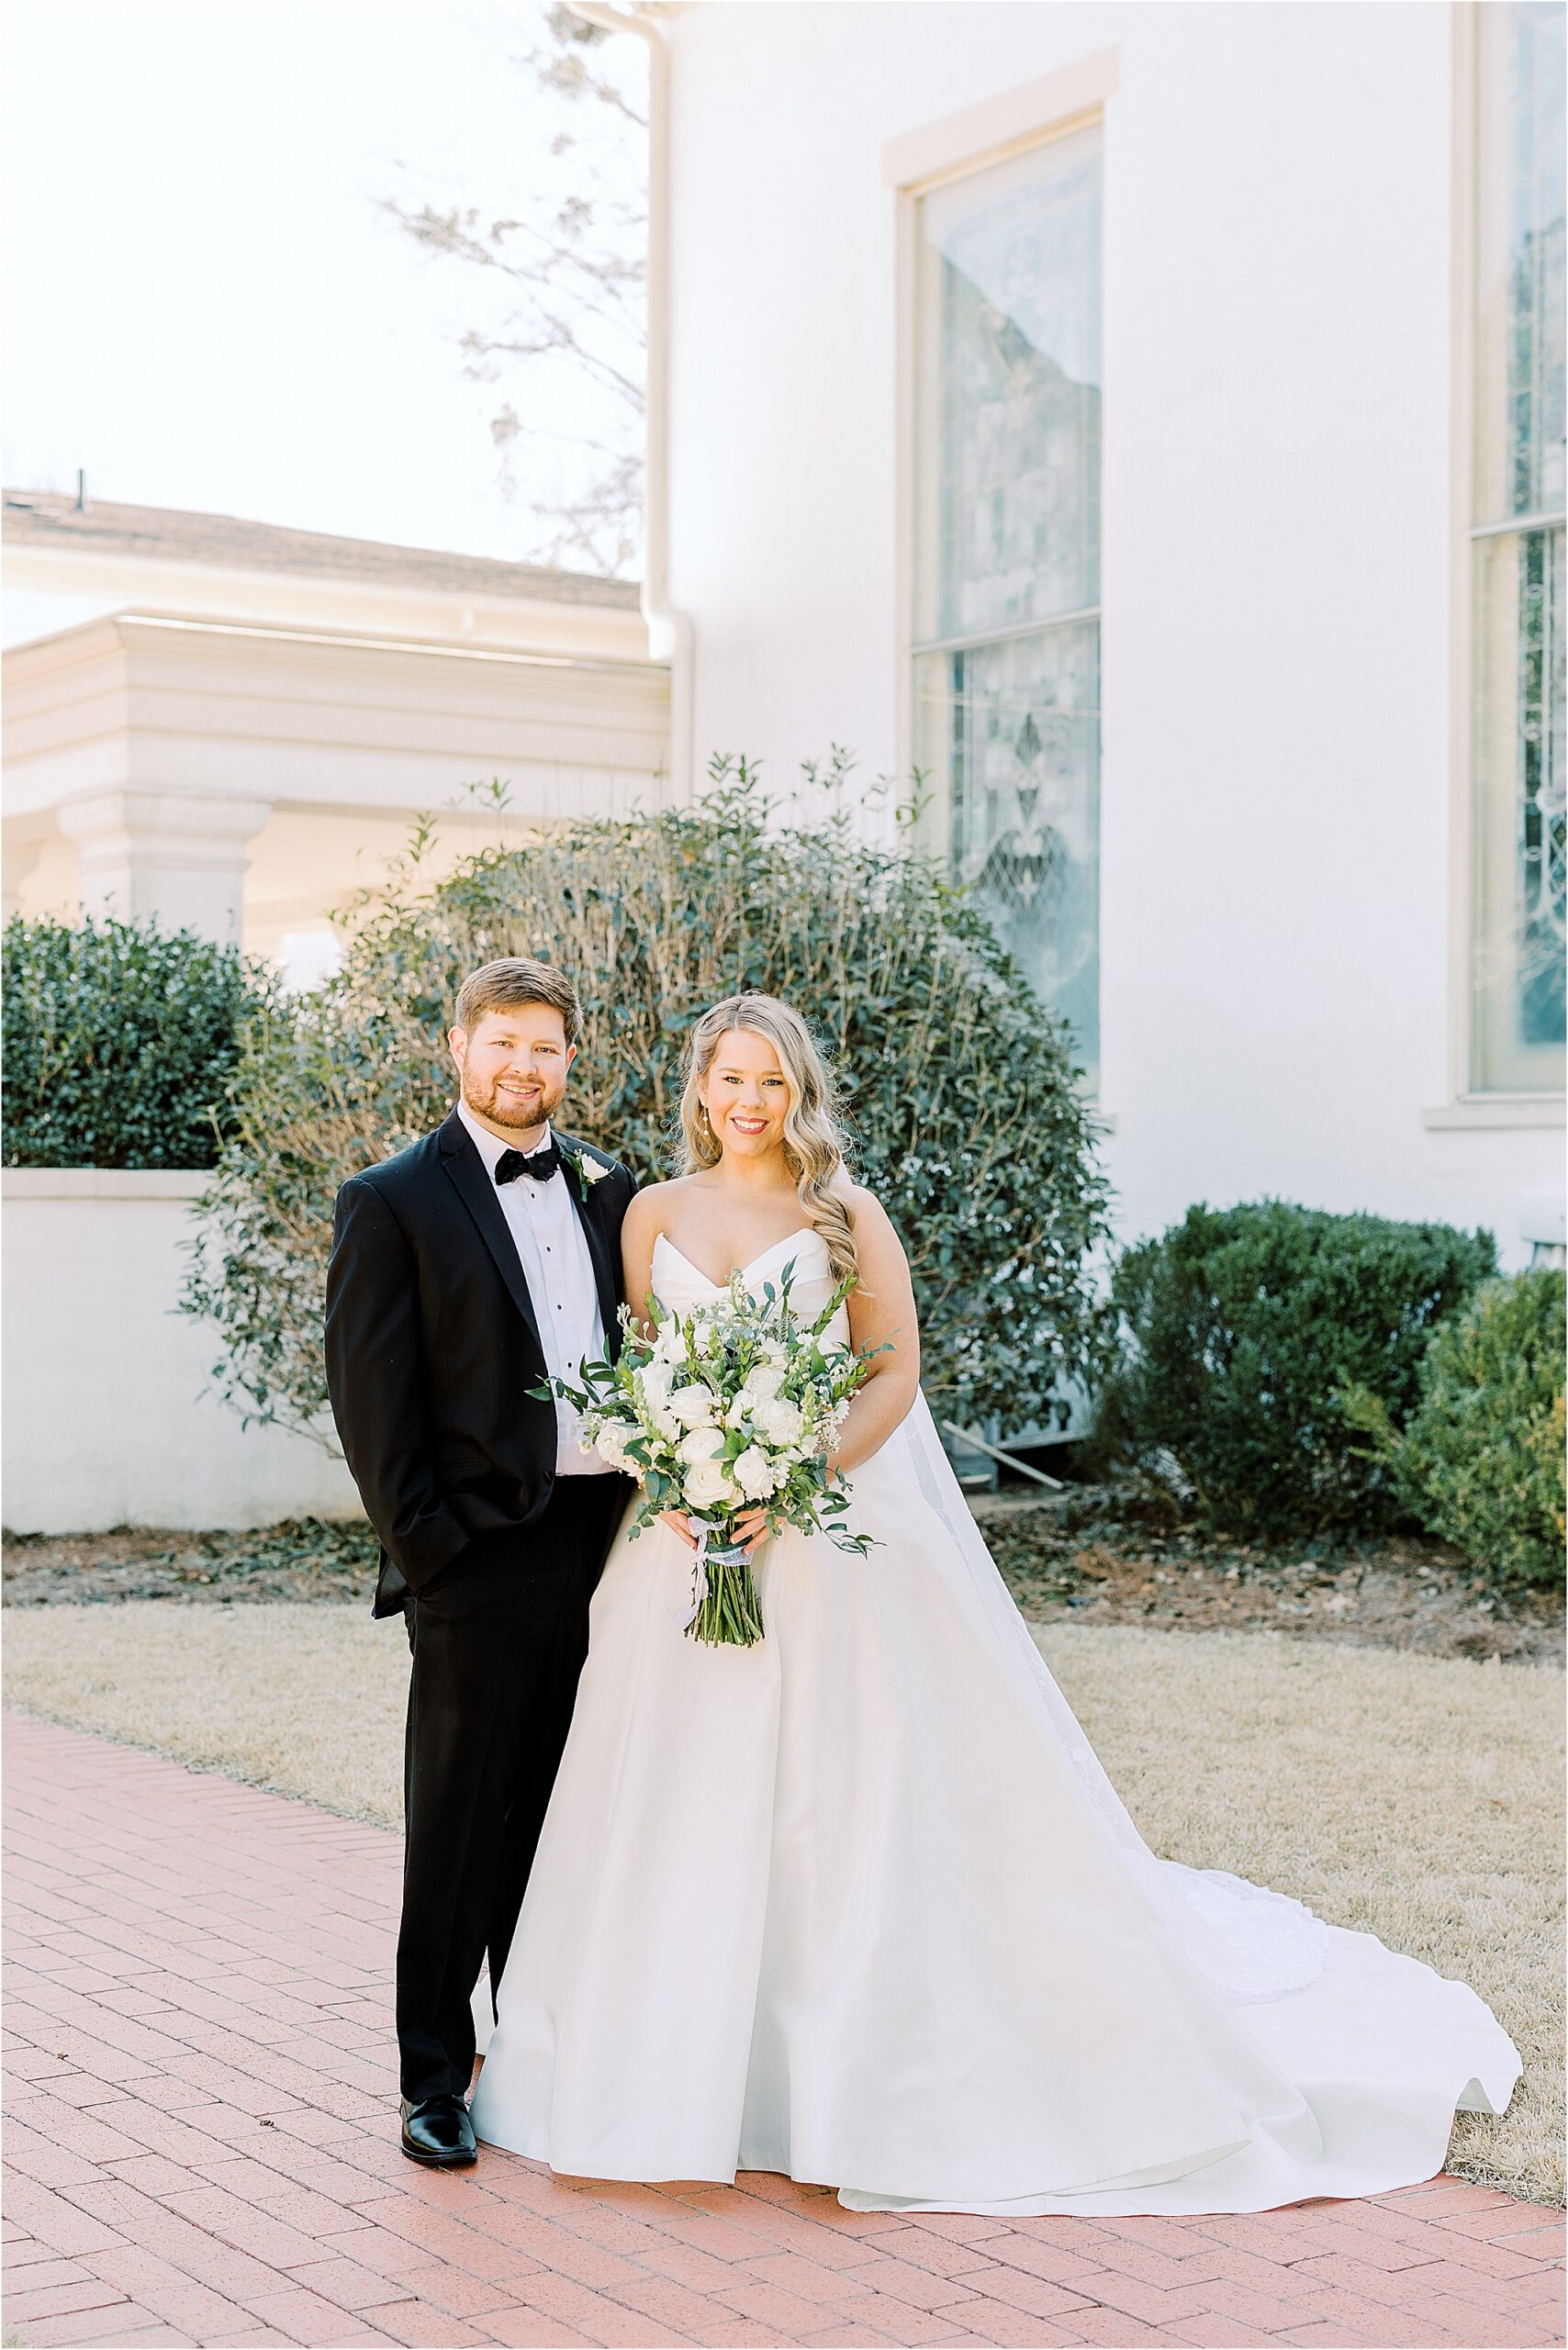 Bride in a white dress while holding flowers and the groom in a black tuxedo standing in front of a white church. 